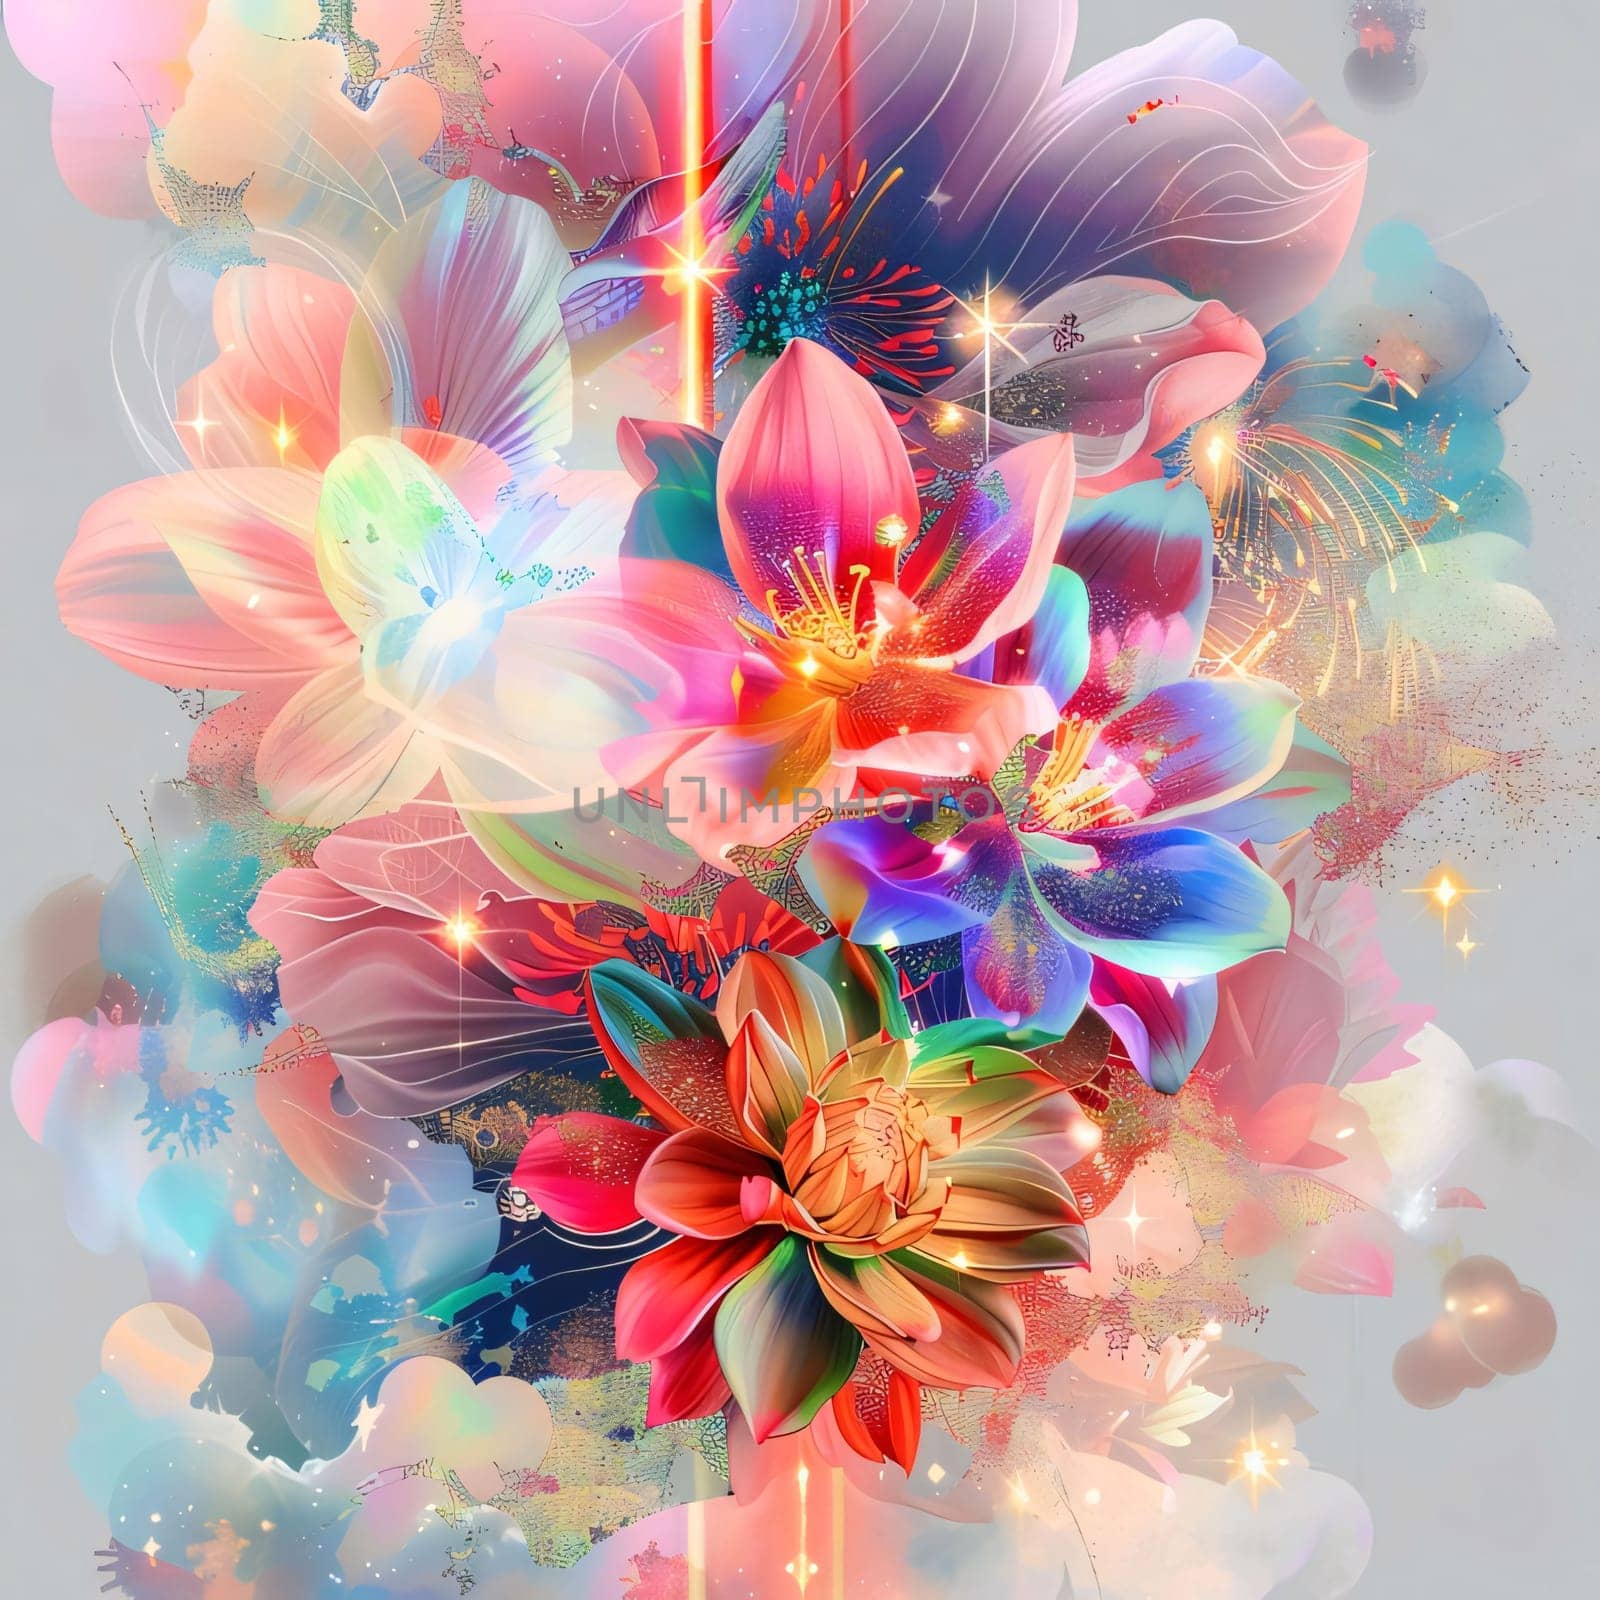 Bright colorful flowers, abstract concept with bright luminous background. Flowering flowers, a symbol of spring, new life. A joyful time of nature awakening to life.